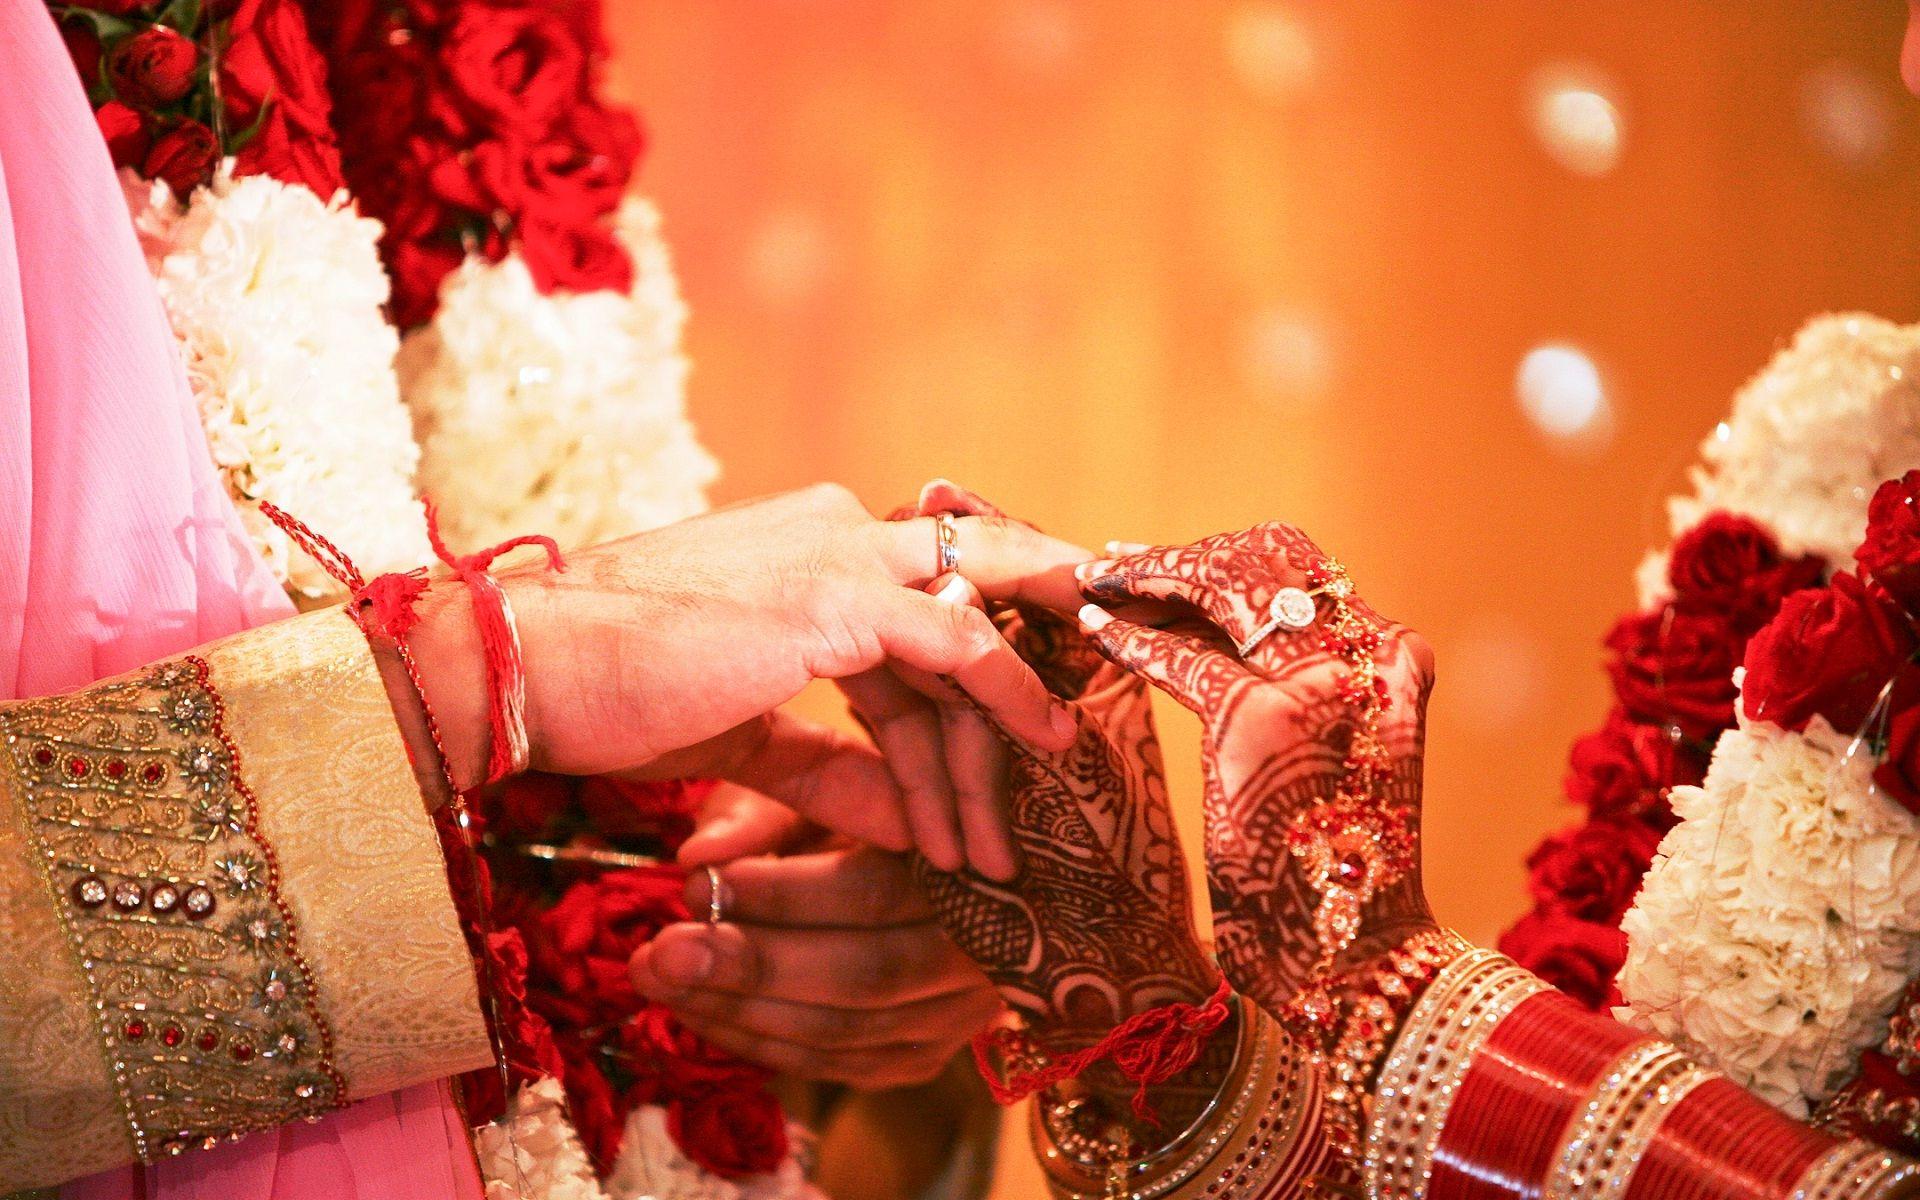 Collection of Wallpaper Wedding on HDWallpaper 1920×1080 Wedding Picture Wallpaper (47 Wallpaper). A. Wallpaper wedding, Best wedding planner, Indian marriage